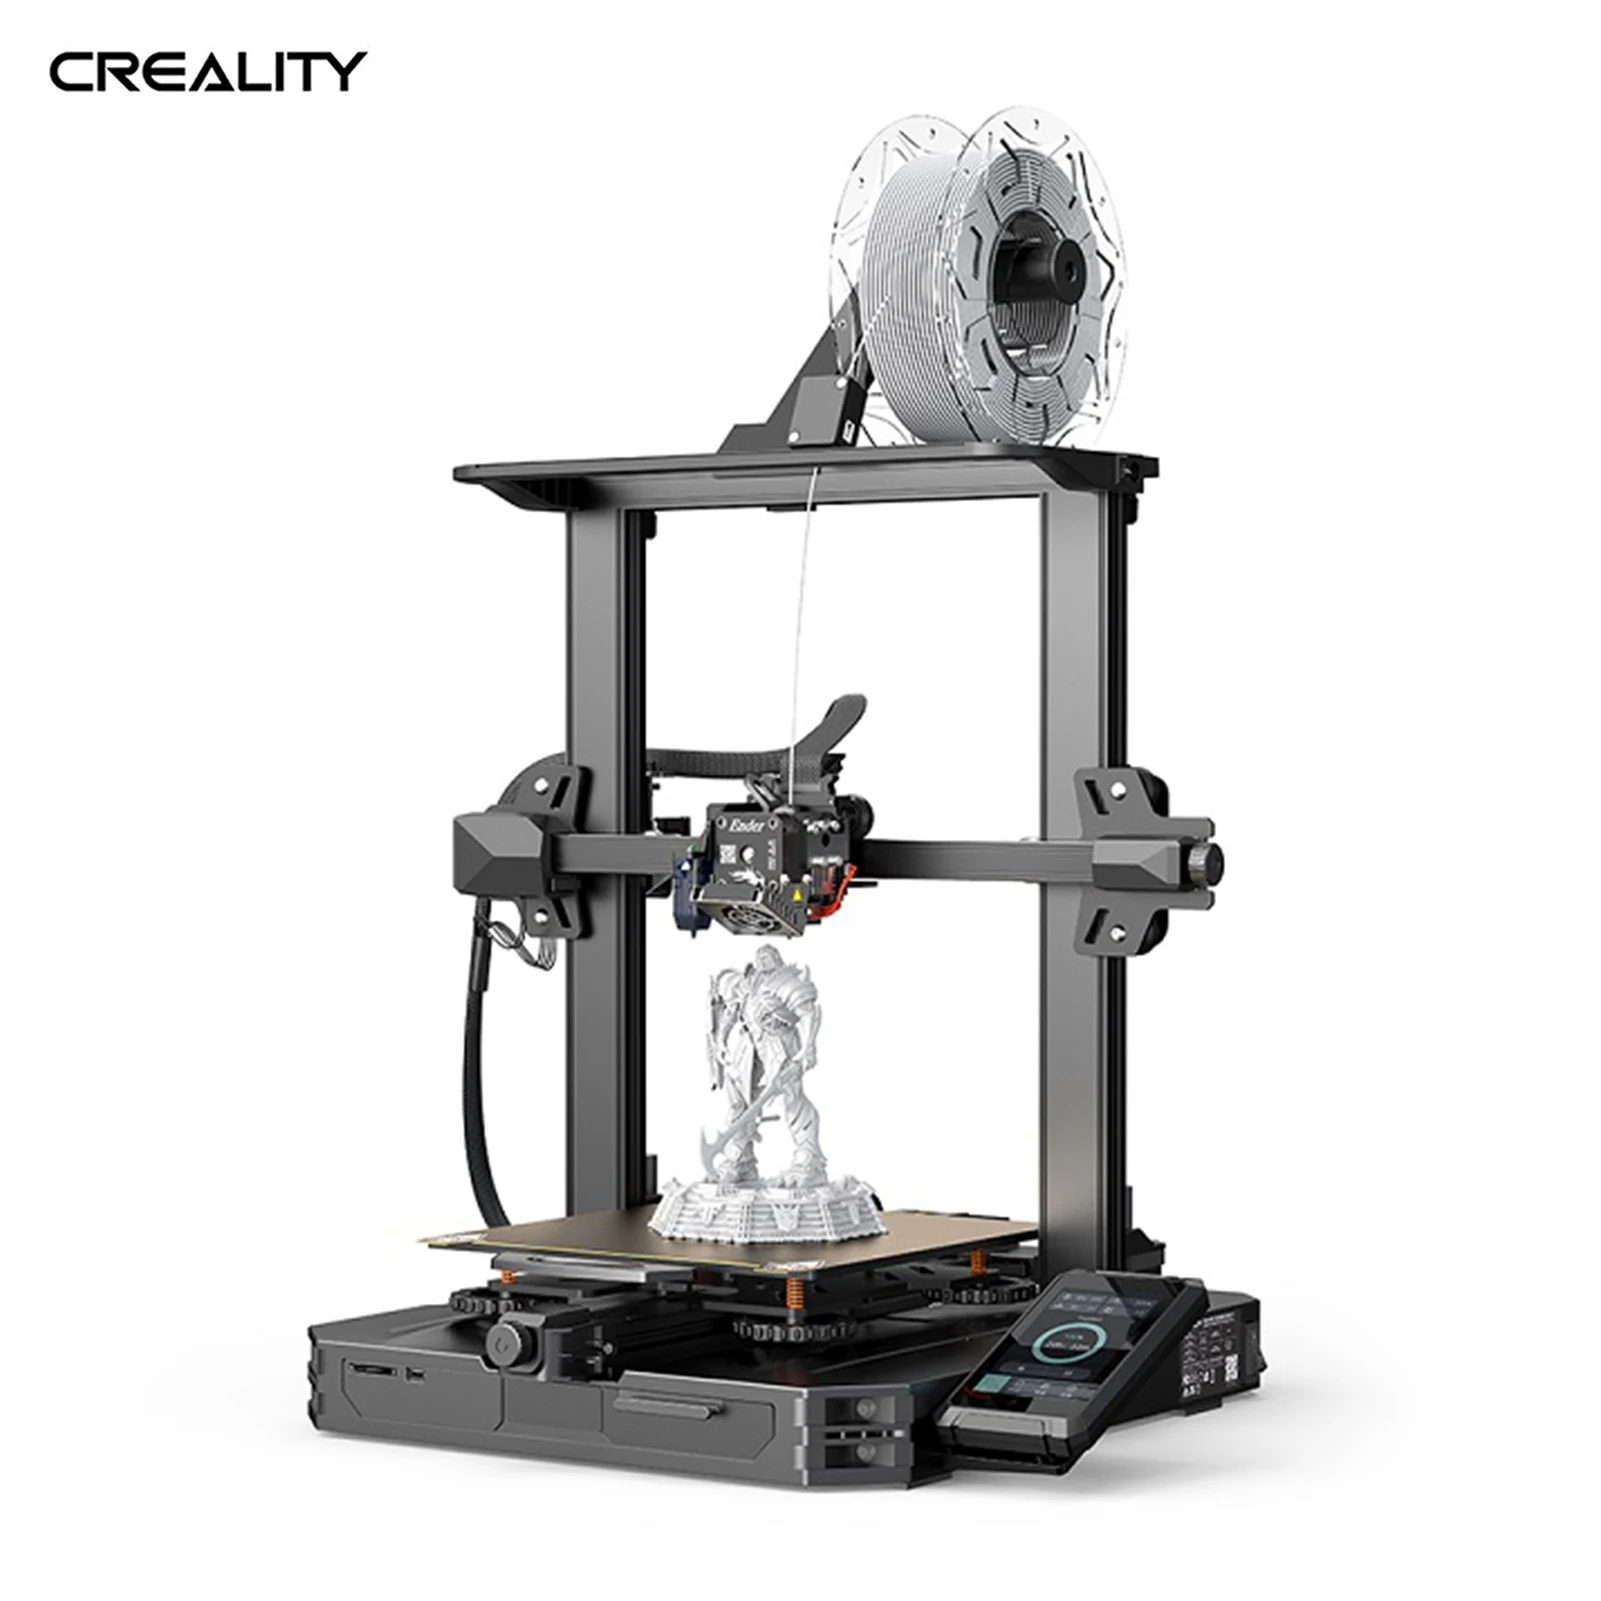 large 3d printer Original CREALITY Ender-3 S1 Pro 3D Printer CR Touch Automatic Levelling High-performance Printer With 220*220*270mm Print Size 3d laser printer 3D Printers